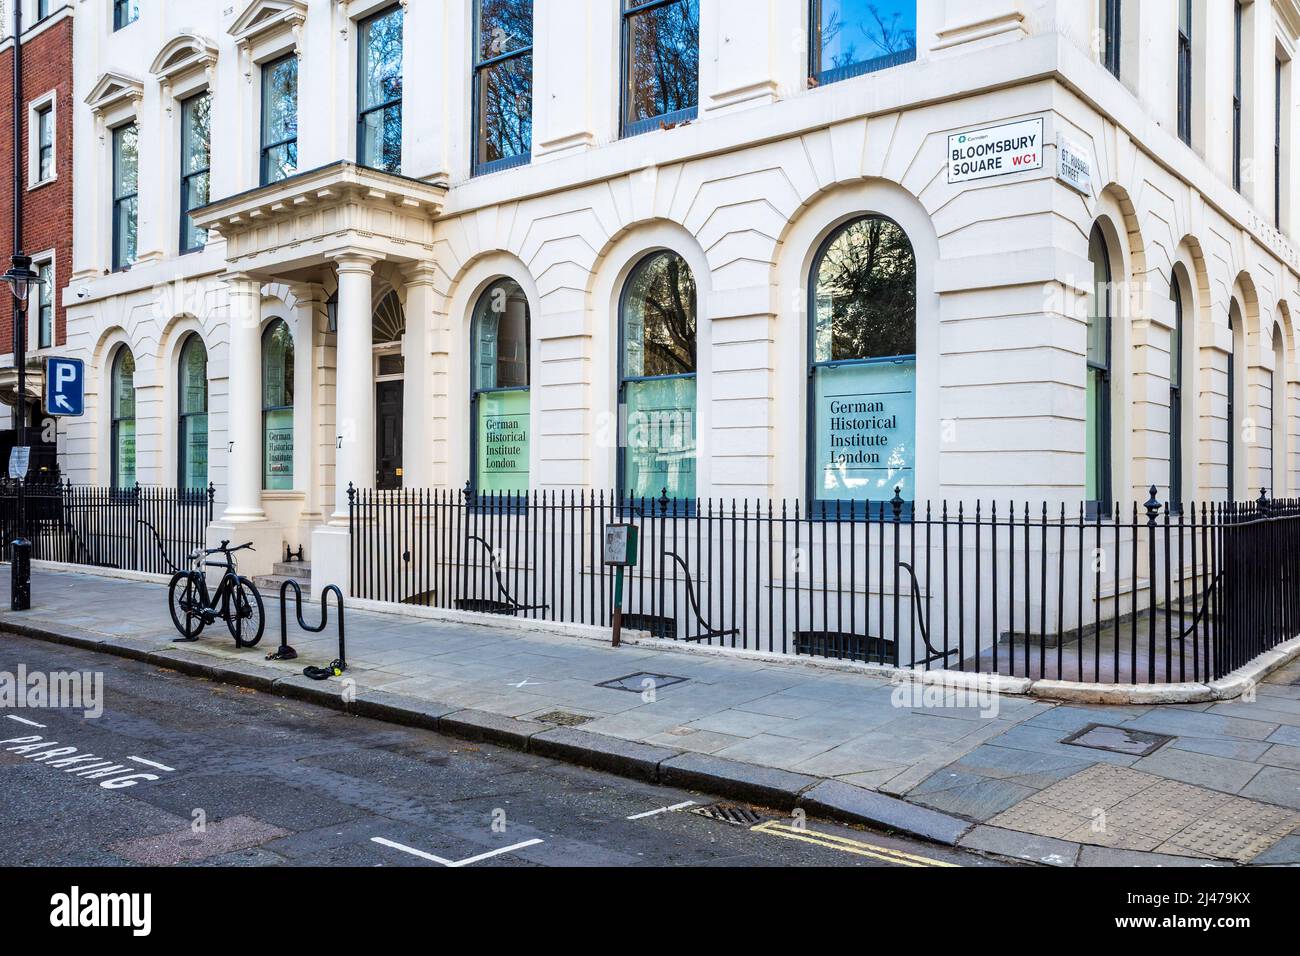 German Historical Institute London 17 Bloomsbury Sq. Founded in1968 as an independent academic research institute, part of the Max Weber Foundation.Ge Stock Photo